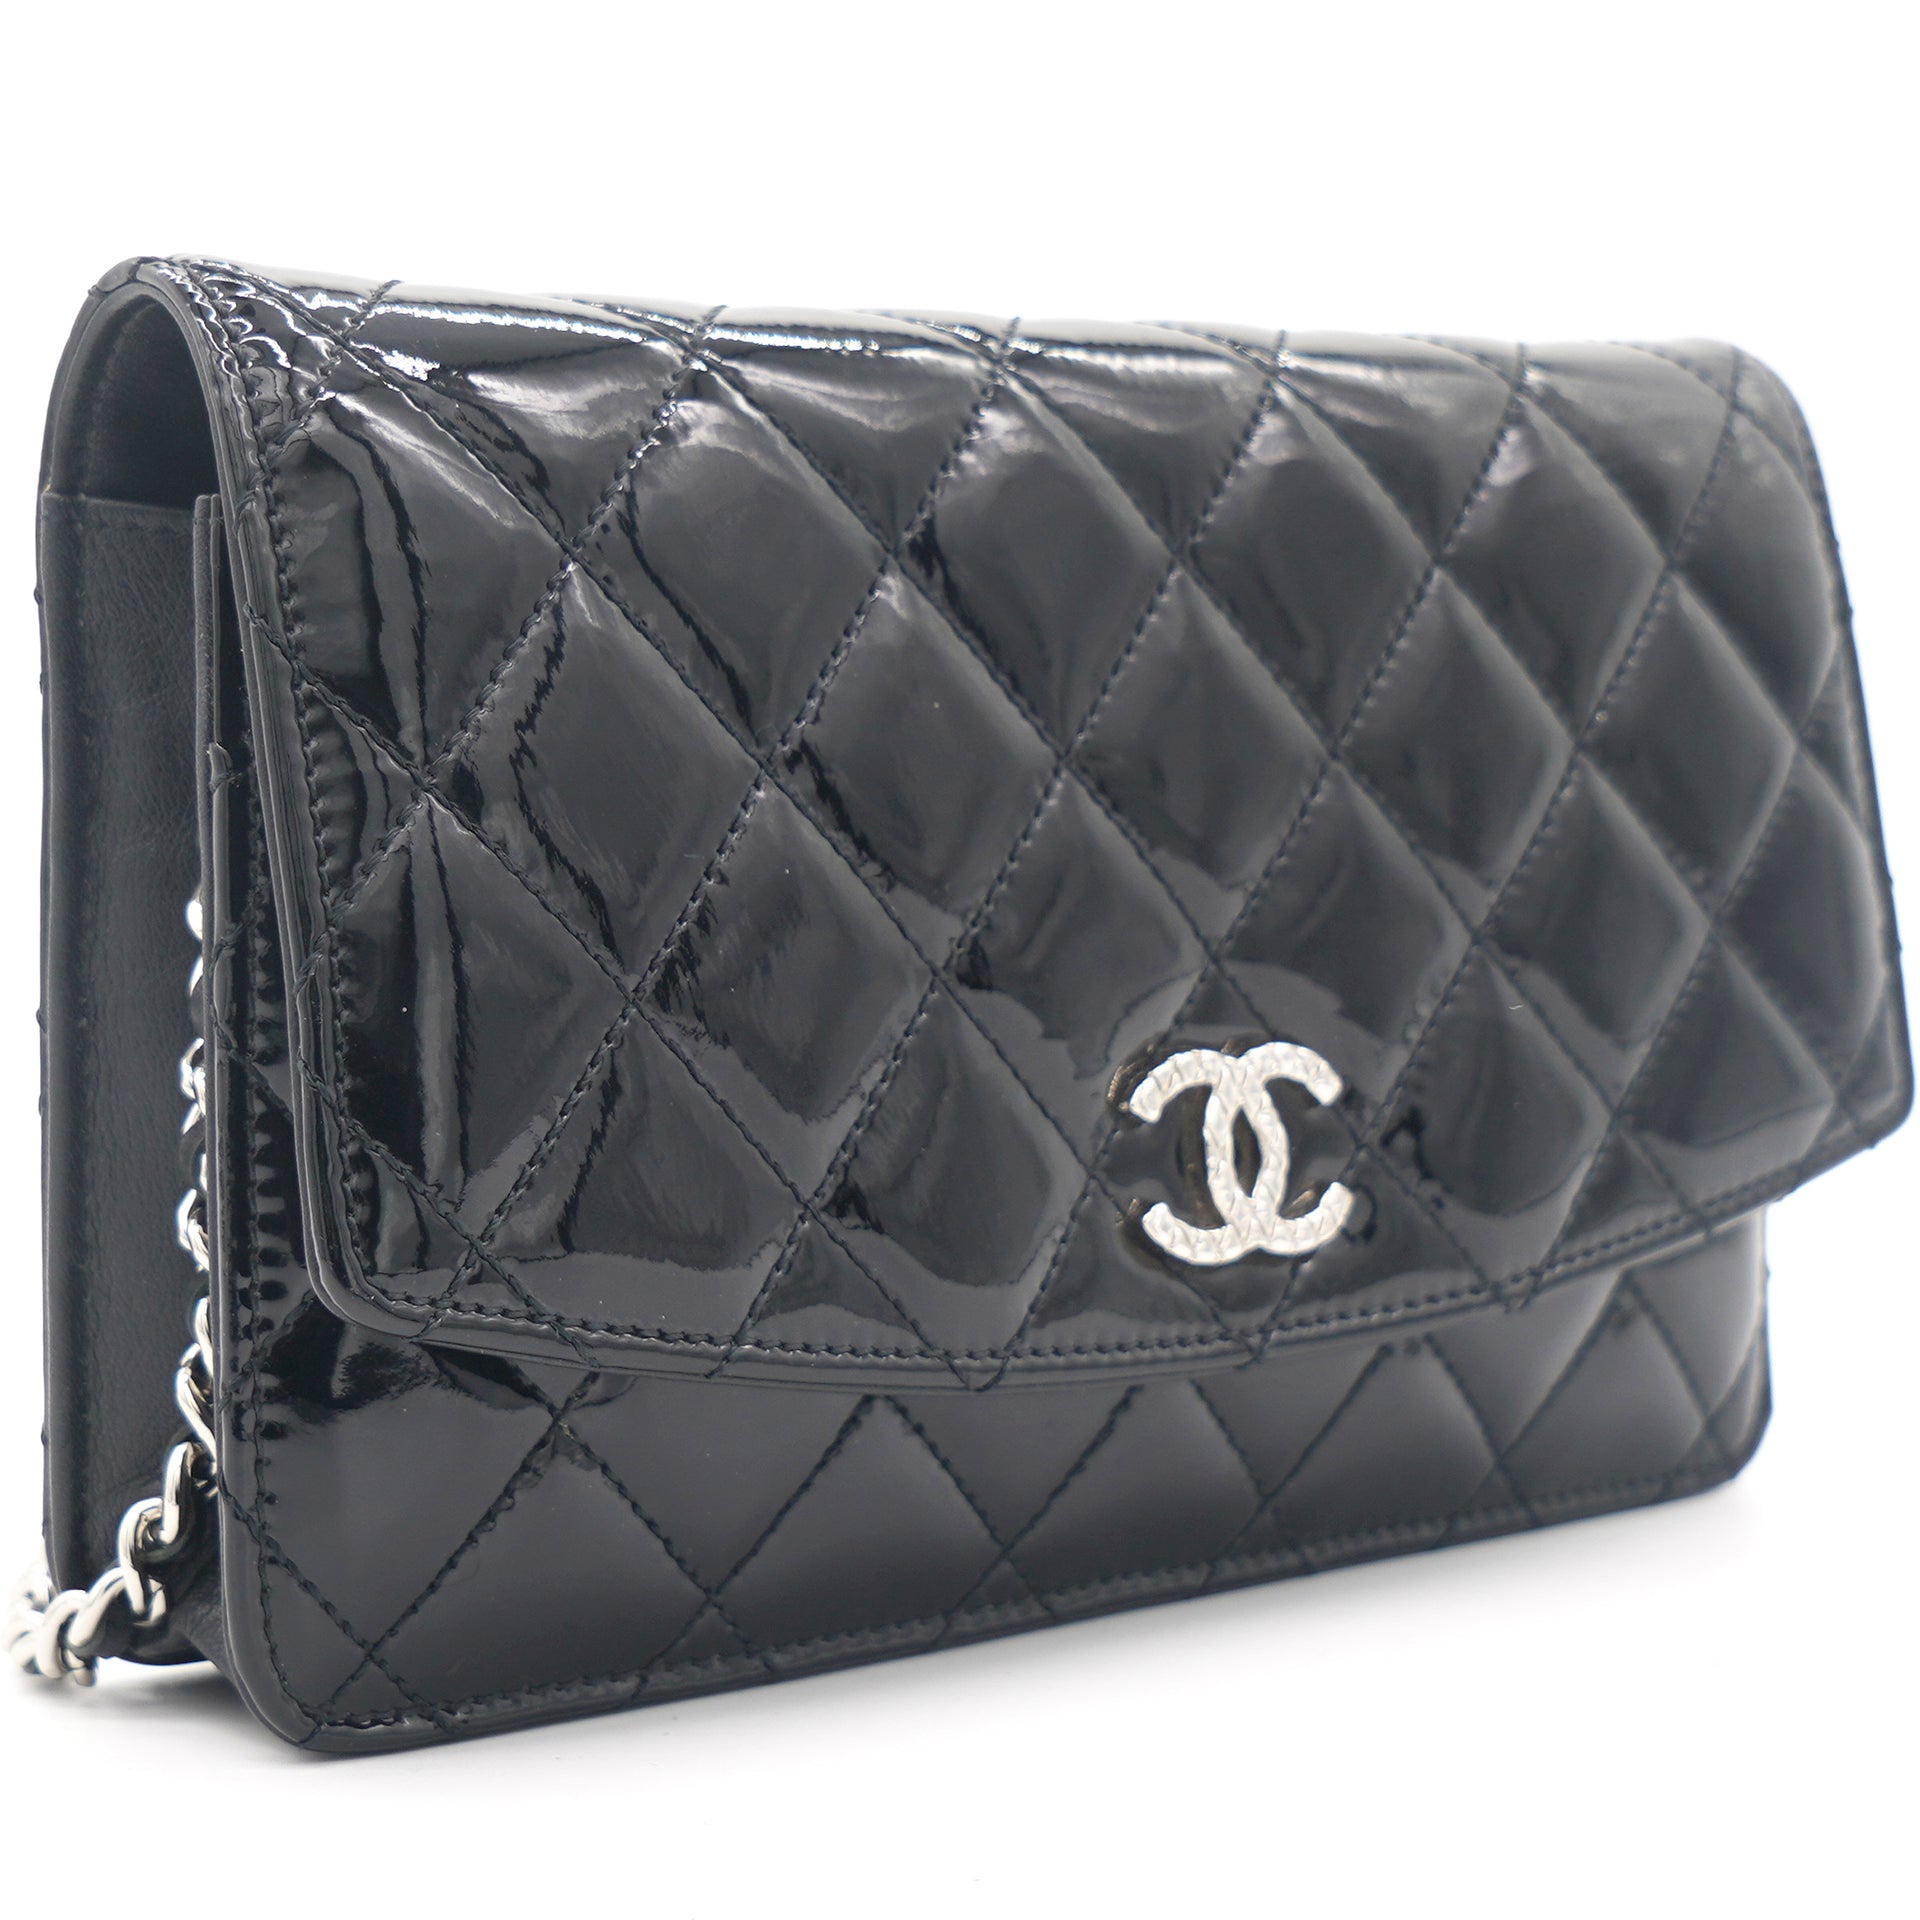 Chanel Patent Quilted Wallet on Chain Woc Brown Metallic Bronze CC